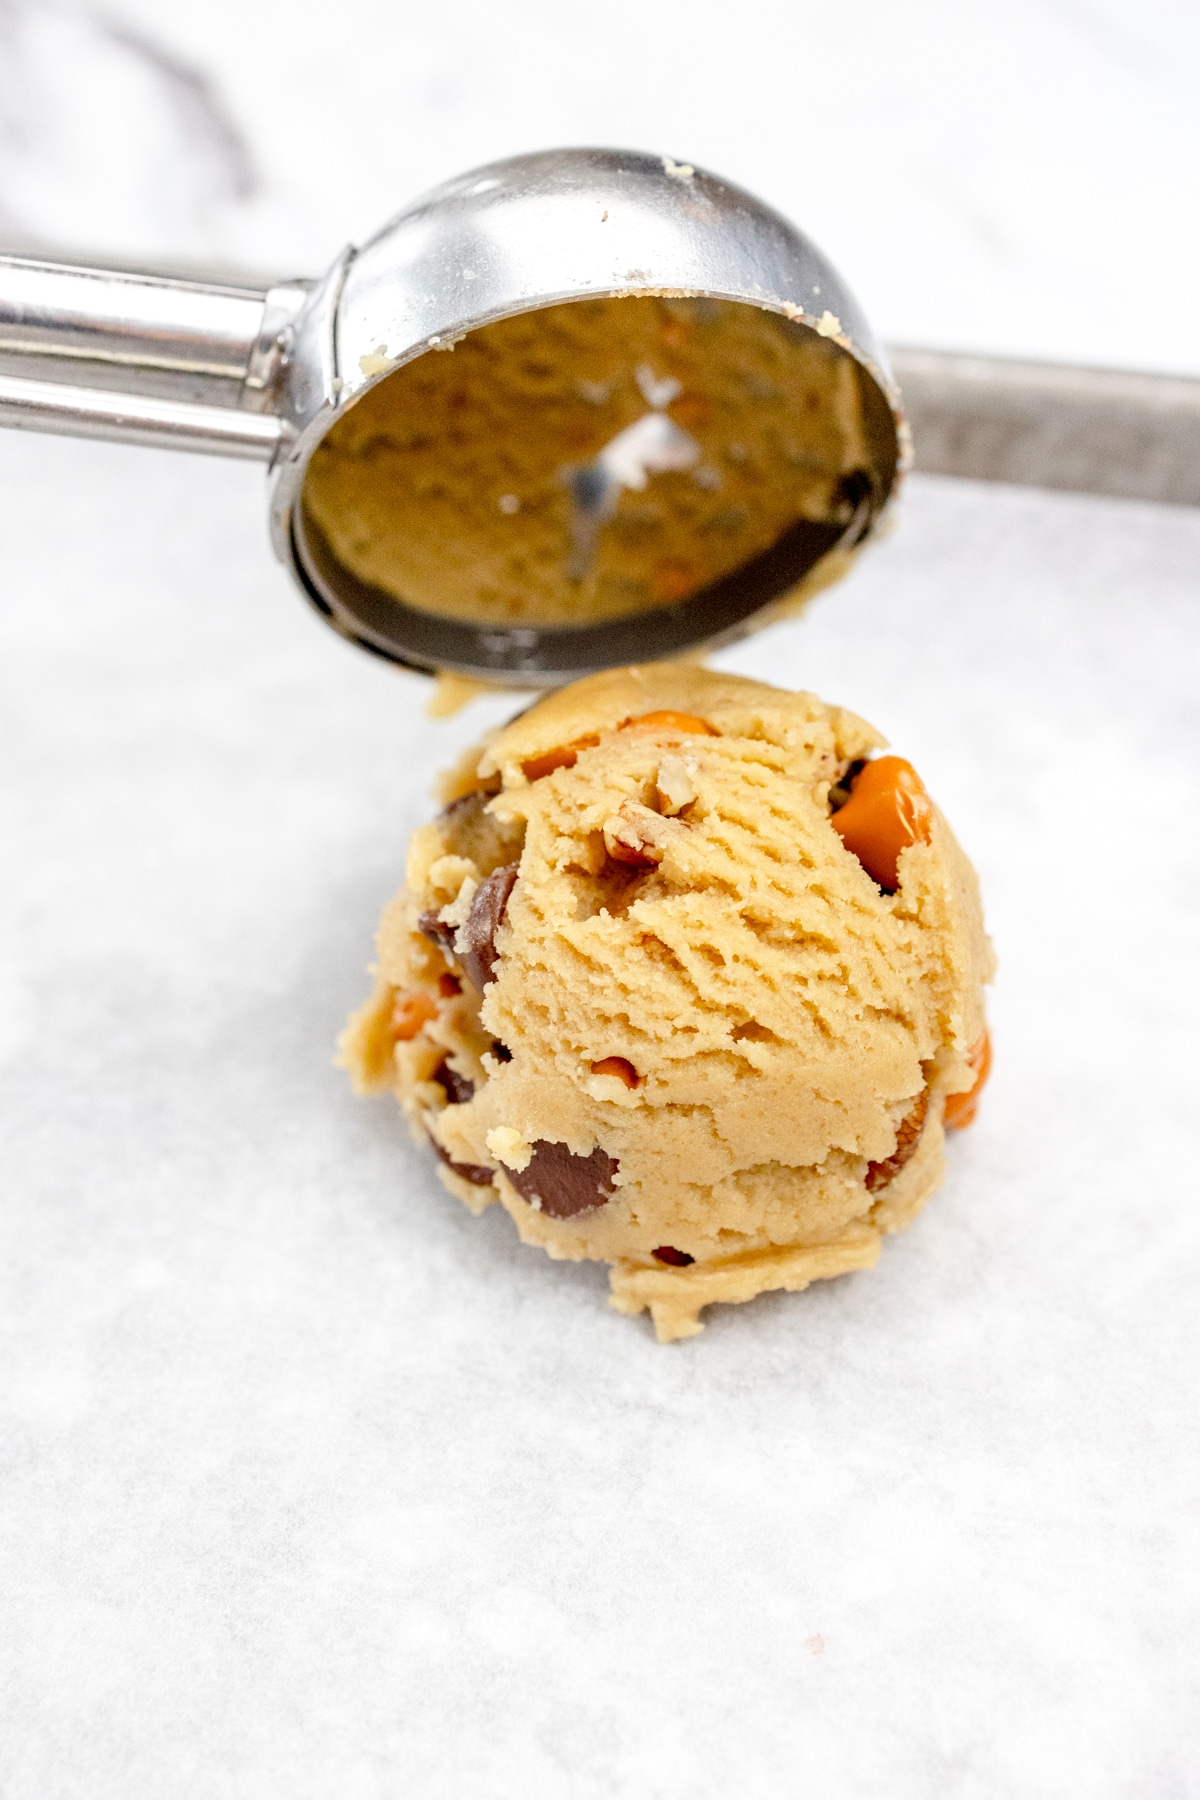 Close up of a cookie scoop placing a scoop of cookie dough onto a baking tray lined with parchment paper